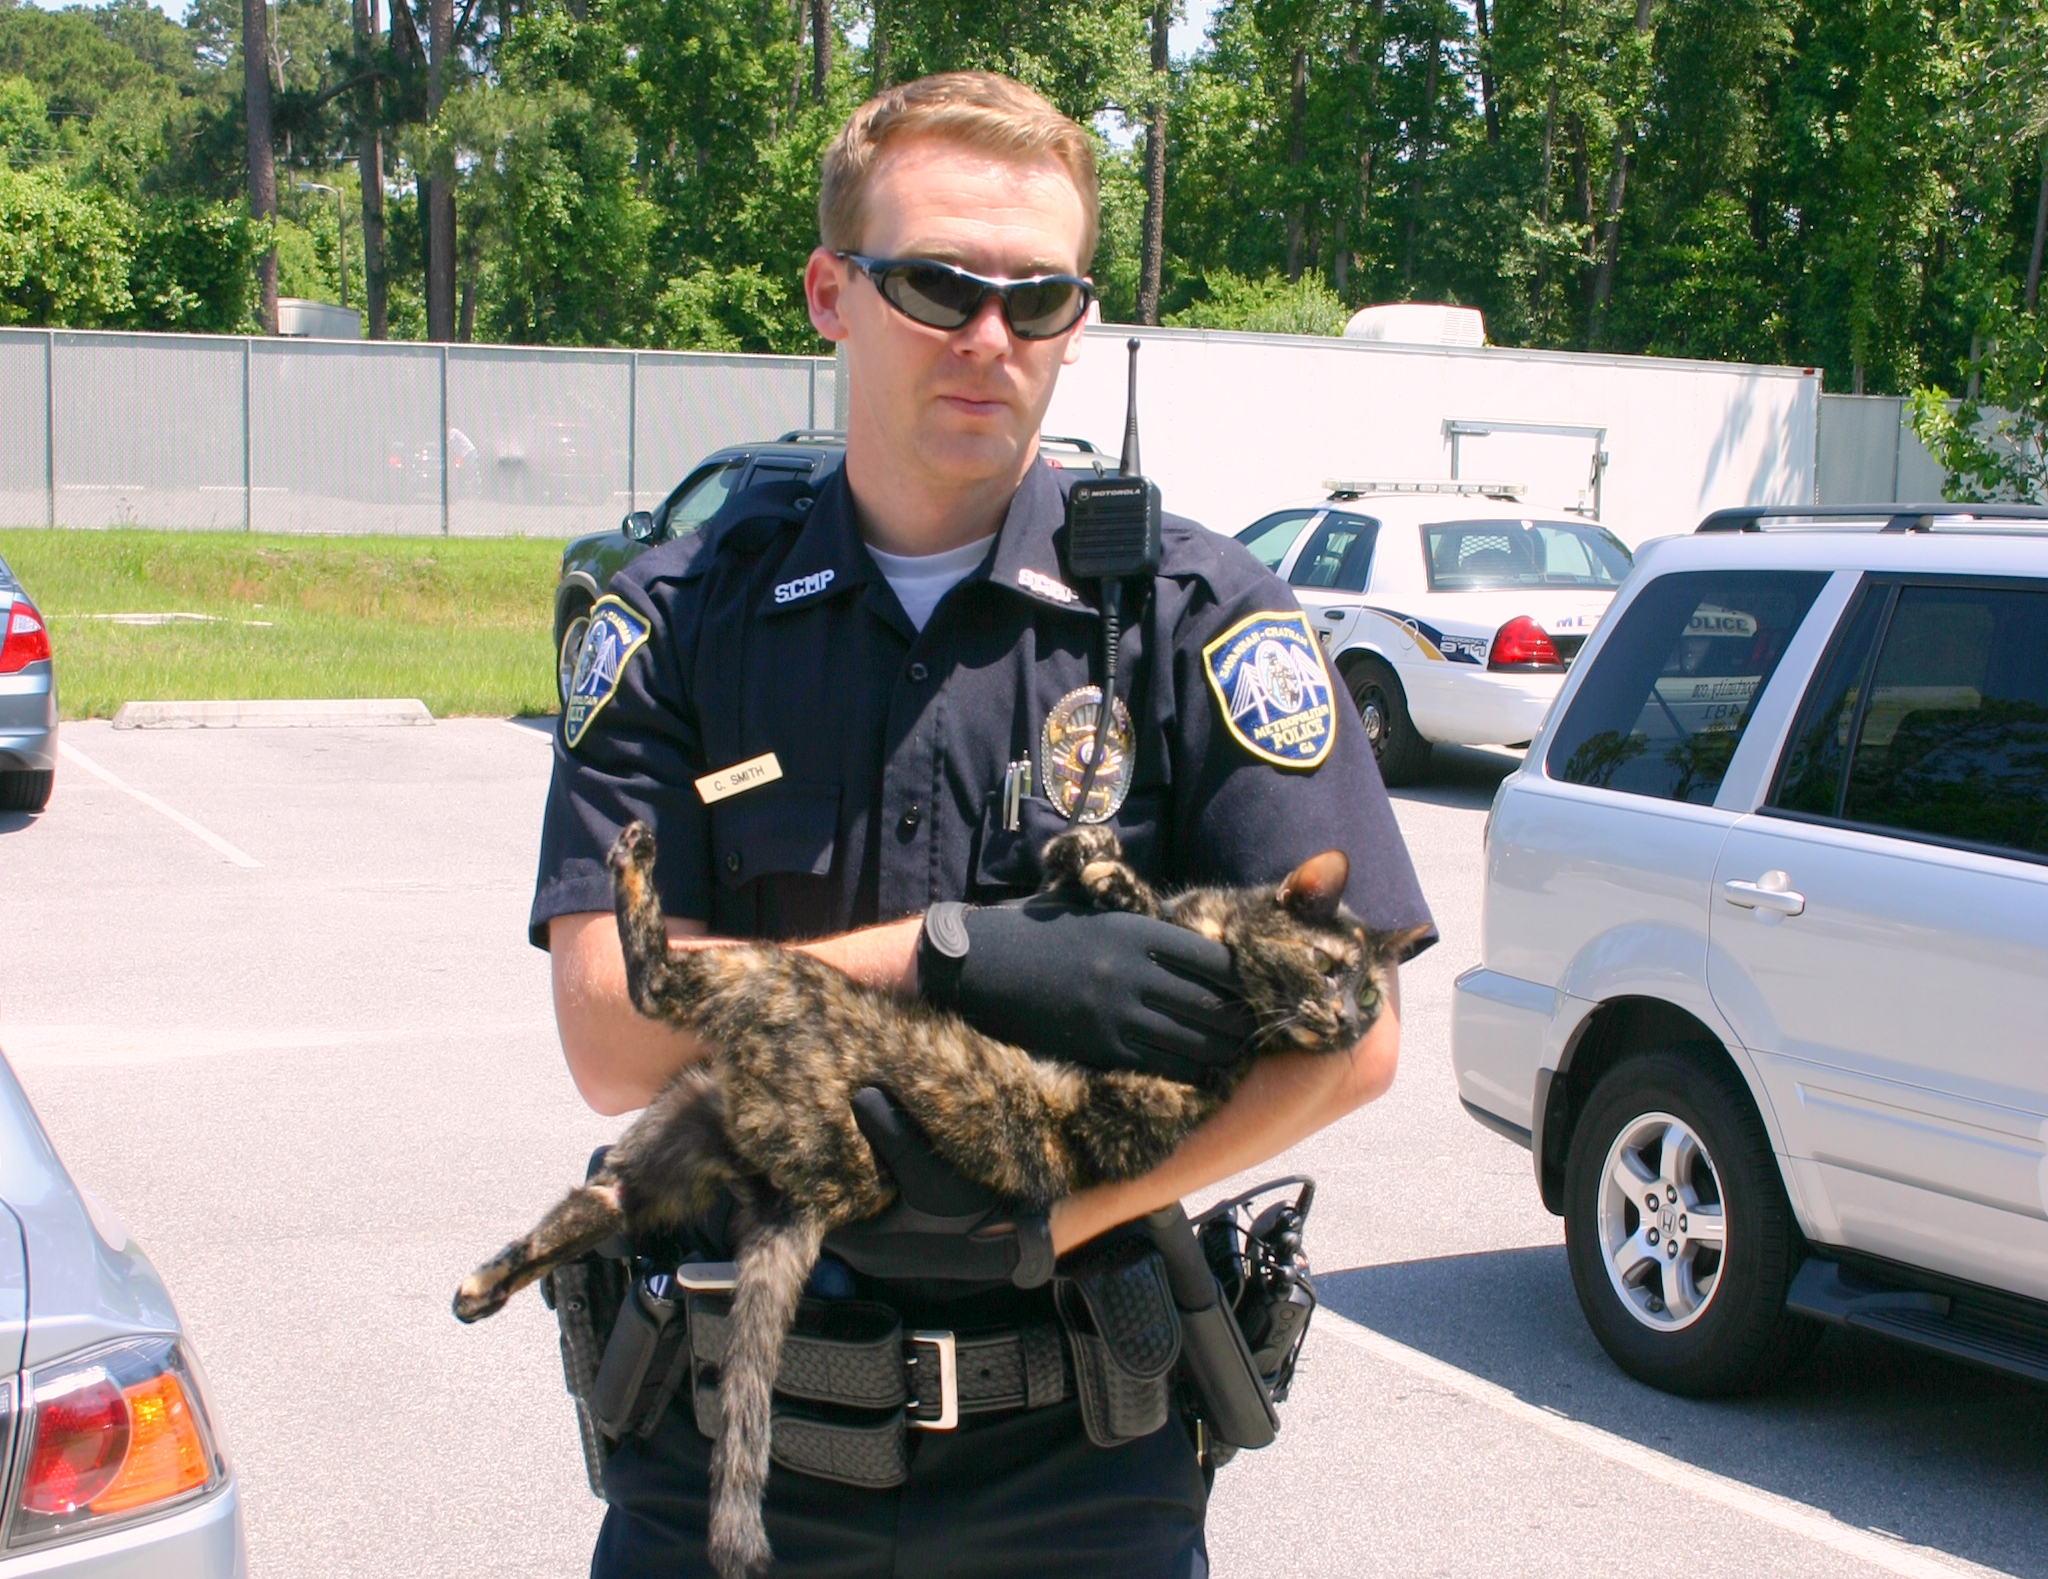 Ofc. Smith and injured cat